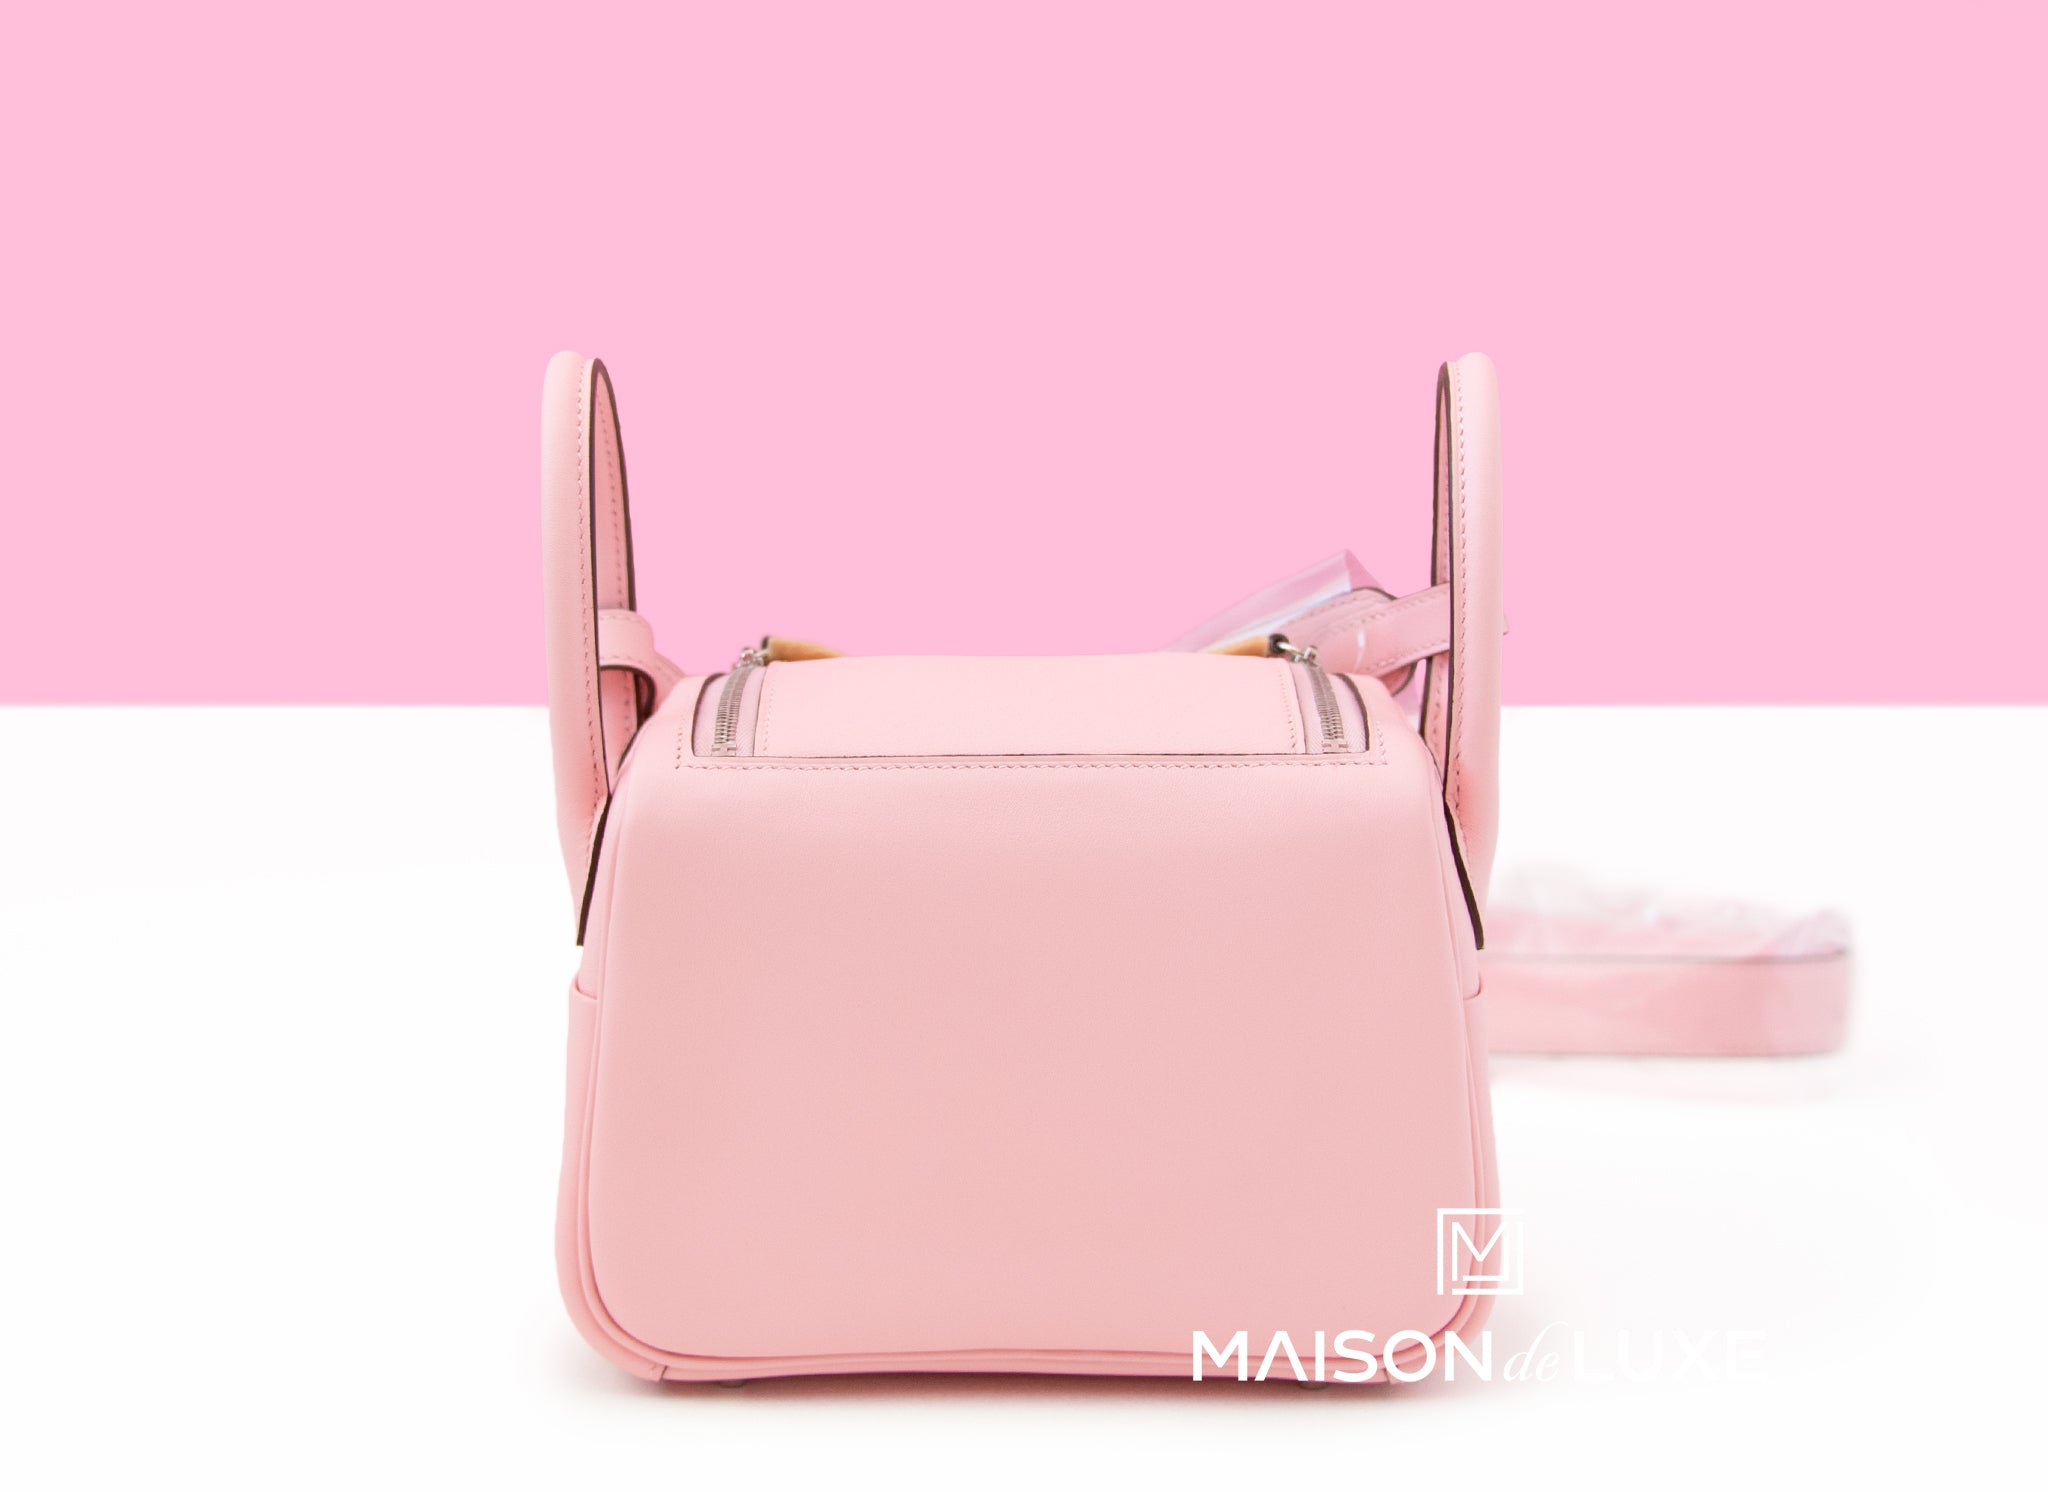 Inspired Lindy Bag | Real Leather Luxury Handbags Small-18 cm / Rose Pink